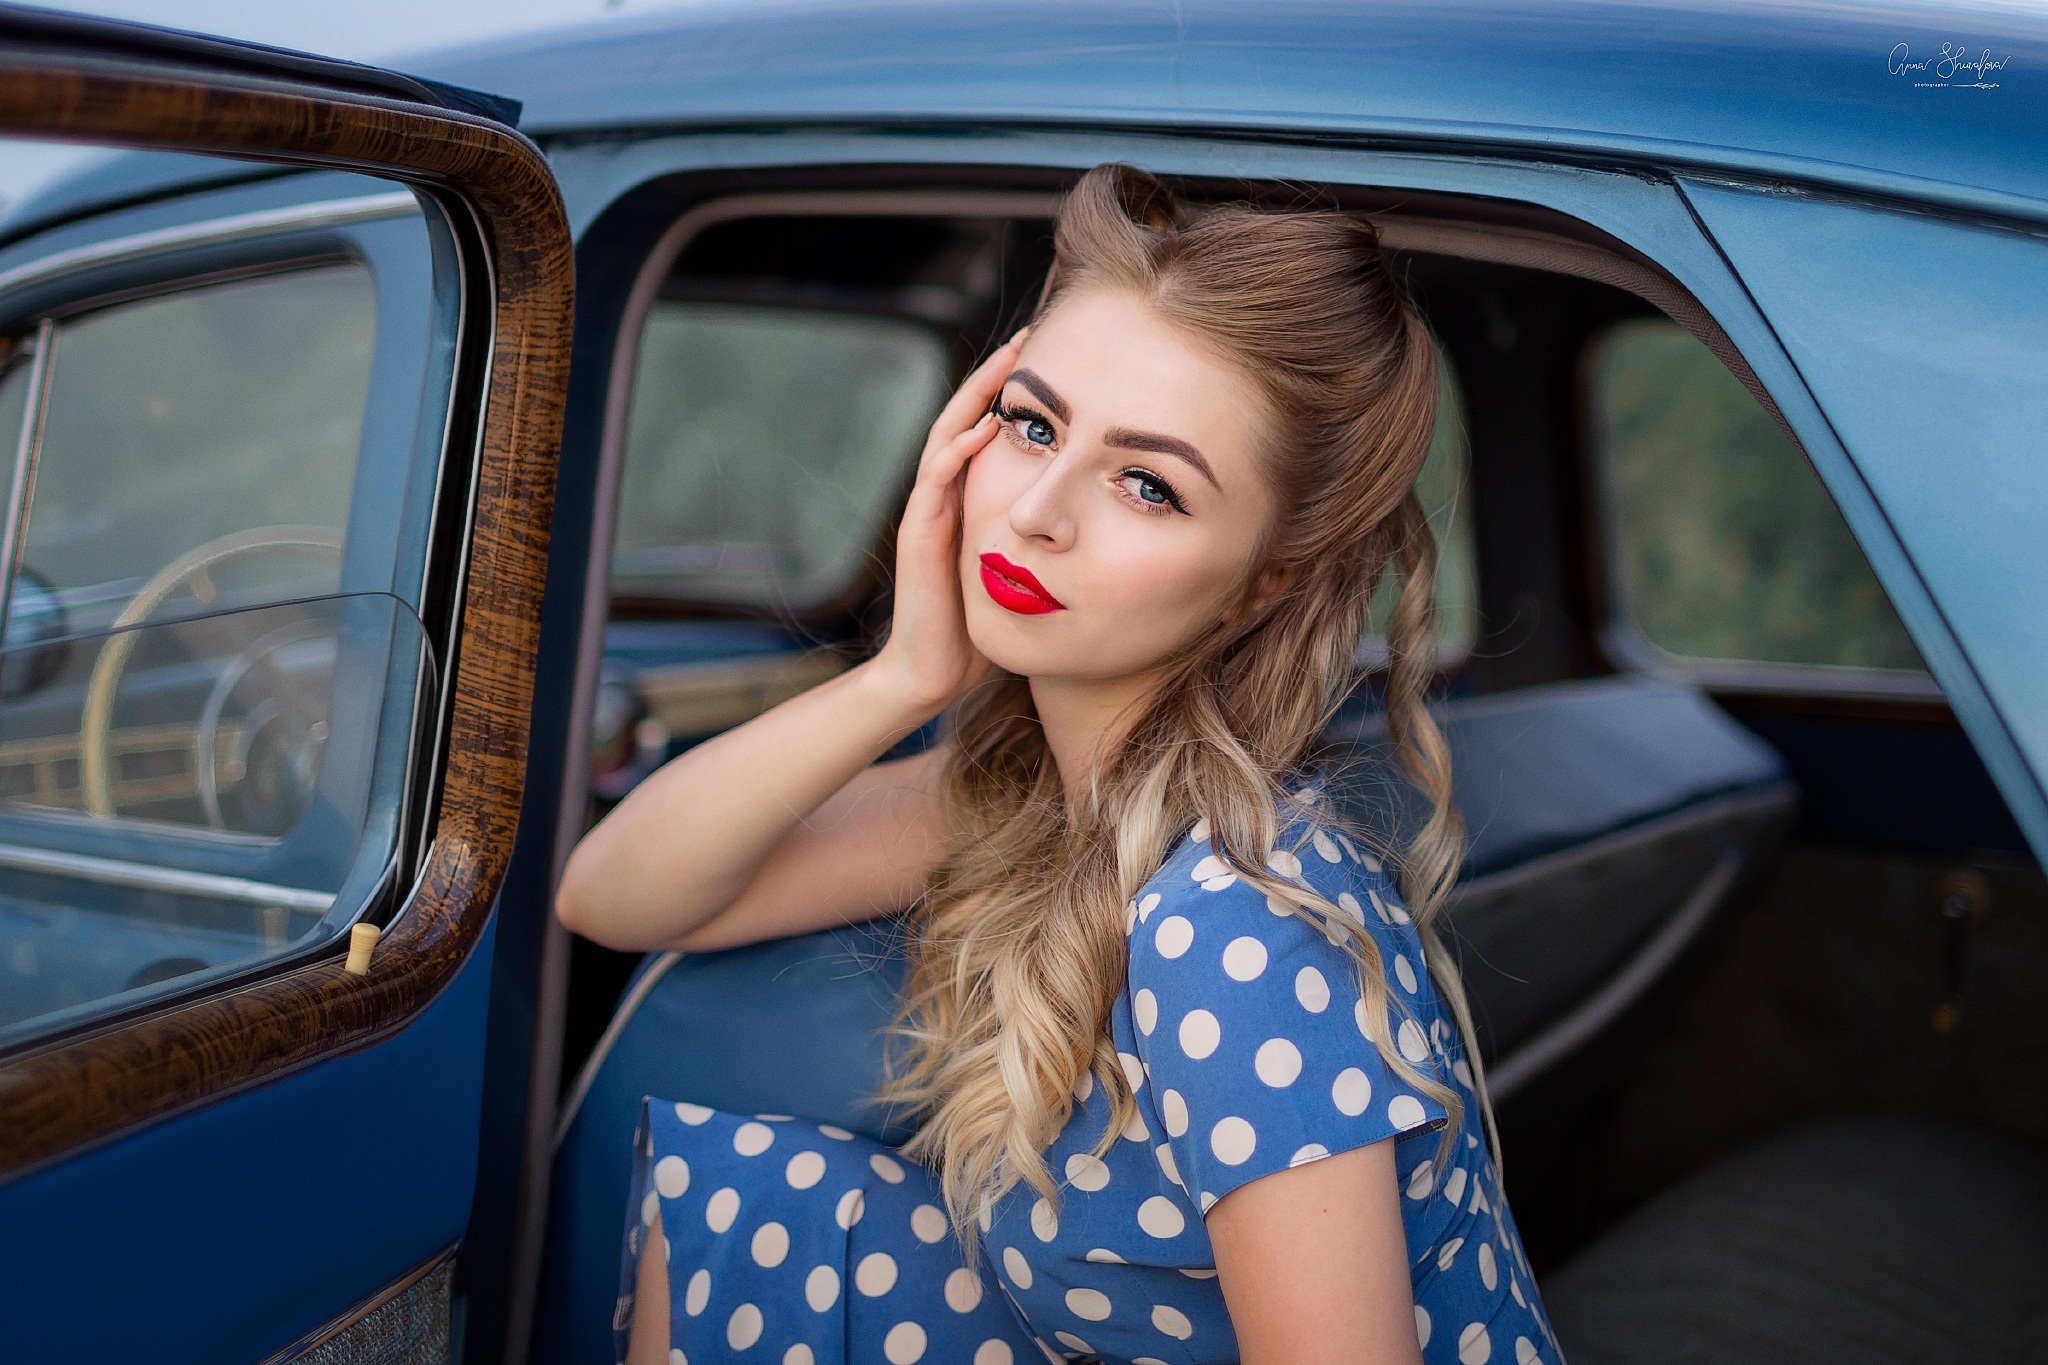 Women With Cars Red Lipstick Women Model Portrait Car Polka Dots Hand On Face Touching Face Car Inte 2048x1365